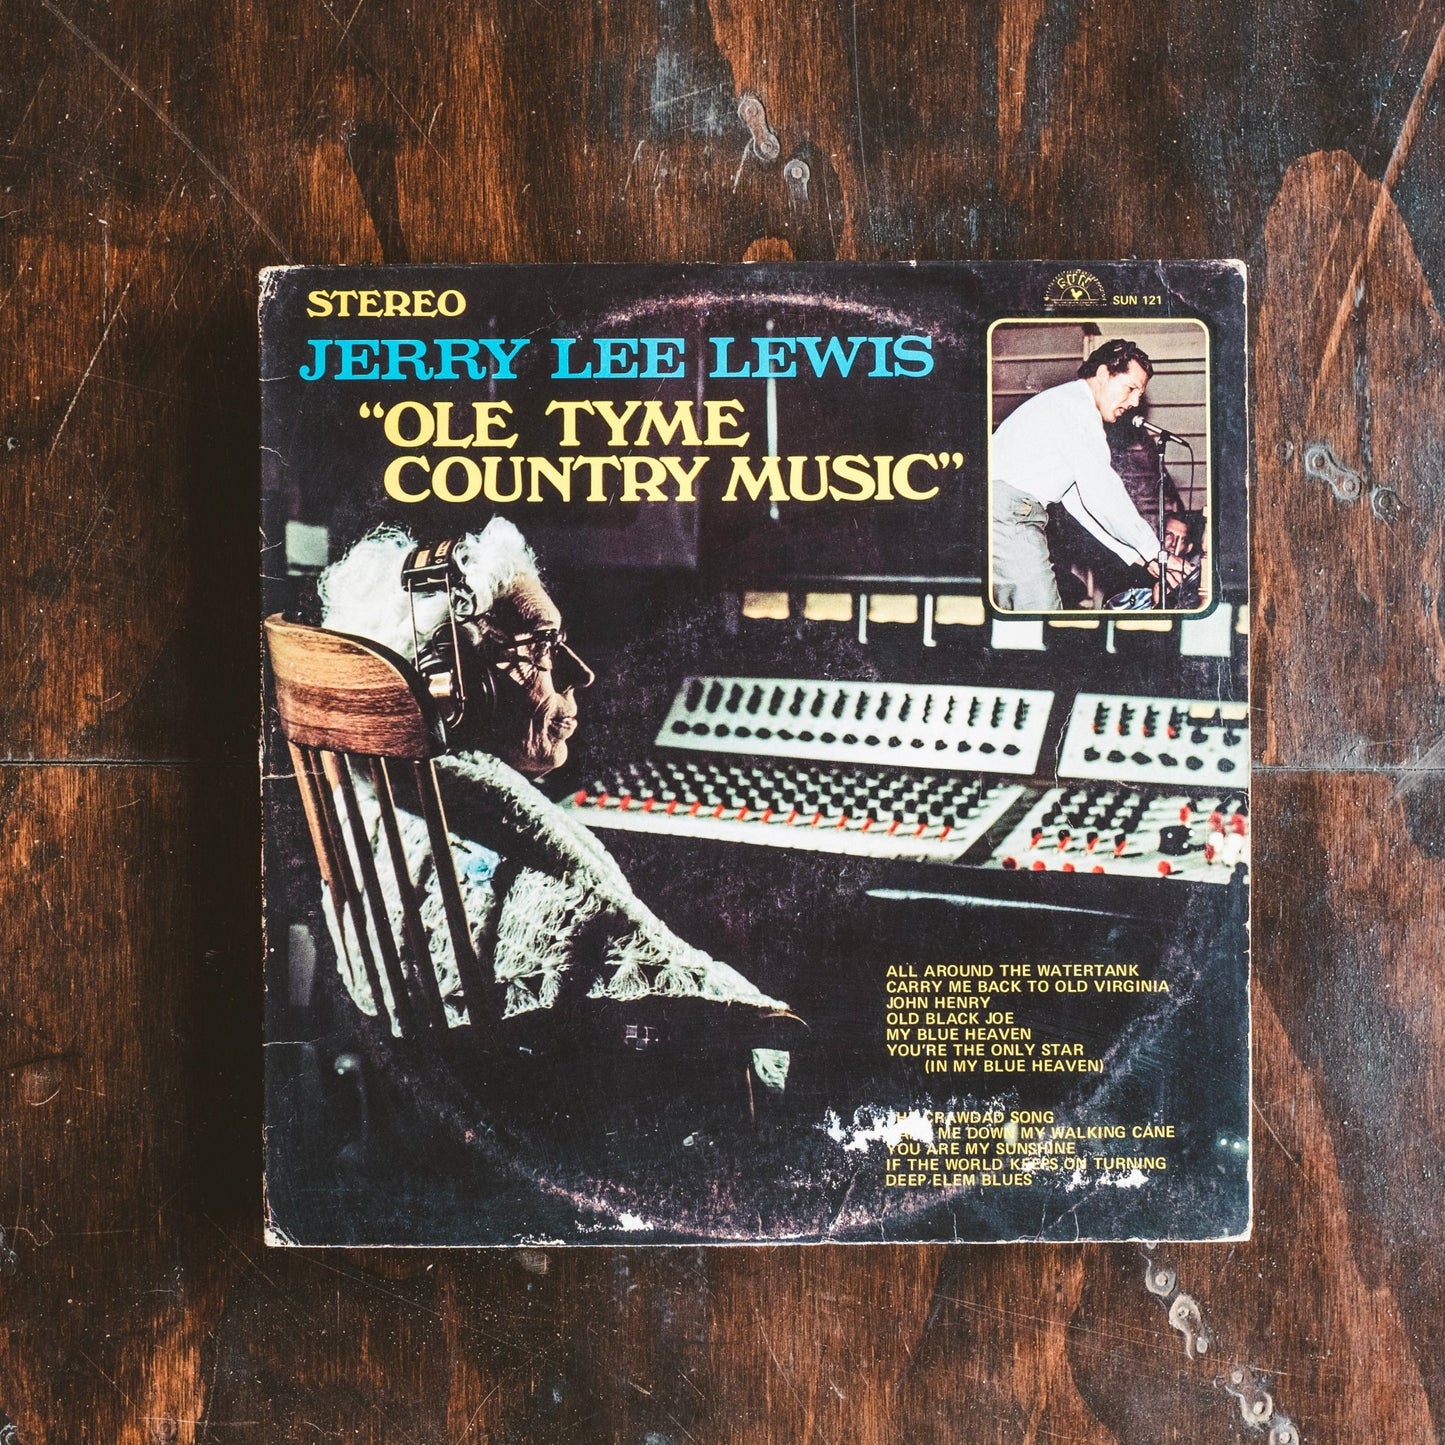 Lewis, Jerry Lee - Ole Tyme Country Music (Pre-Loved) - G-Lewis, Jerry Lee - Ole Tyme Country Music - LP's - Yellow Racket Records